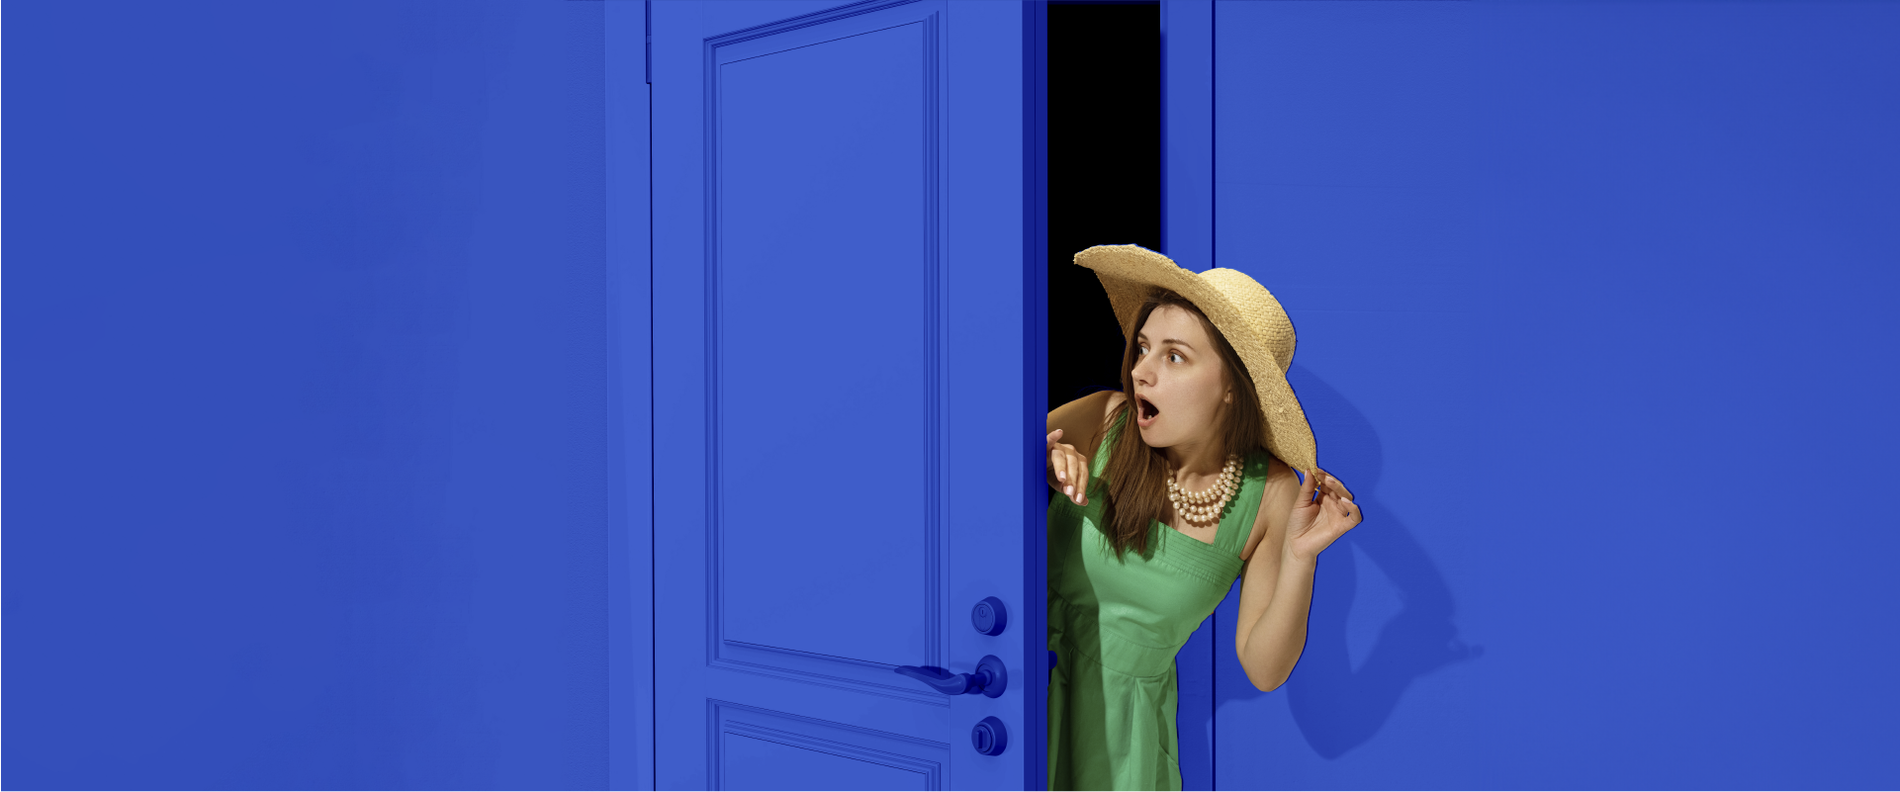 a woman in a green dress and straw hat is peeking out of a blue door